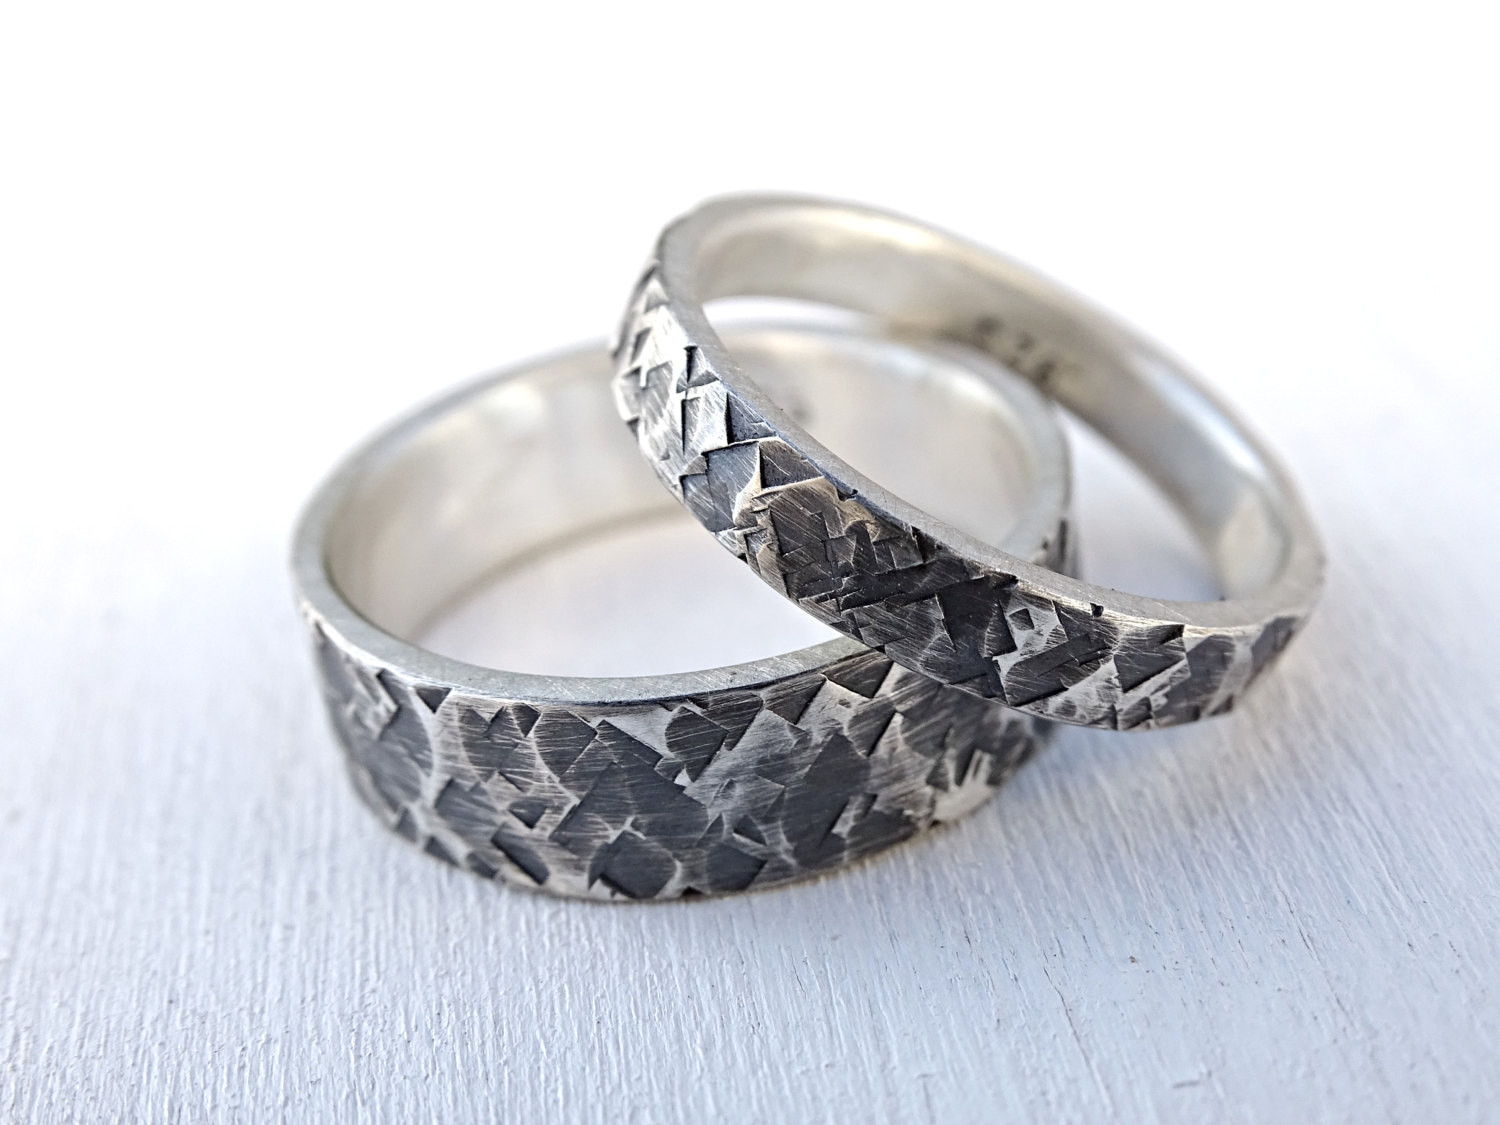 Awesome Wedding Rings
 silver wedding rings unique wedding ring set square pattern